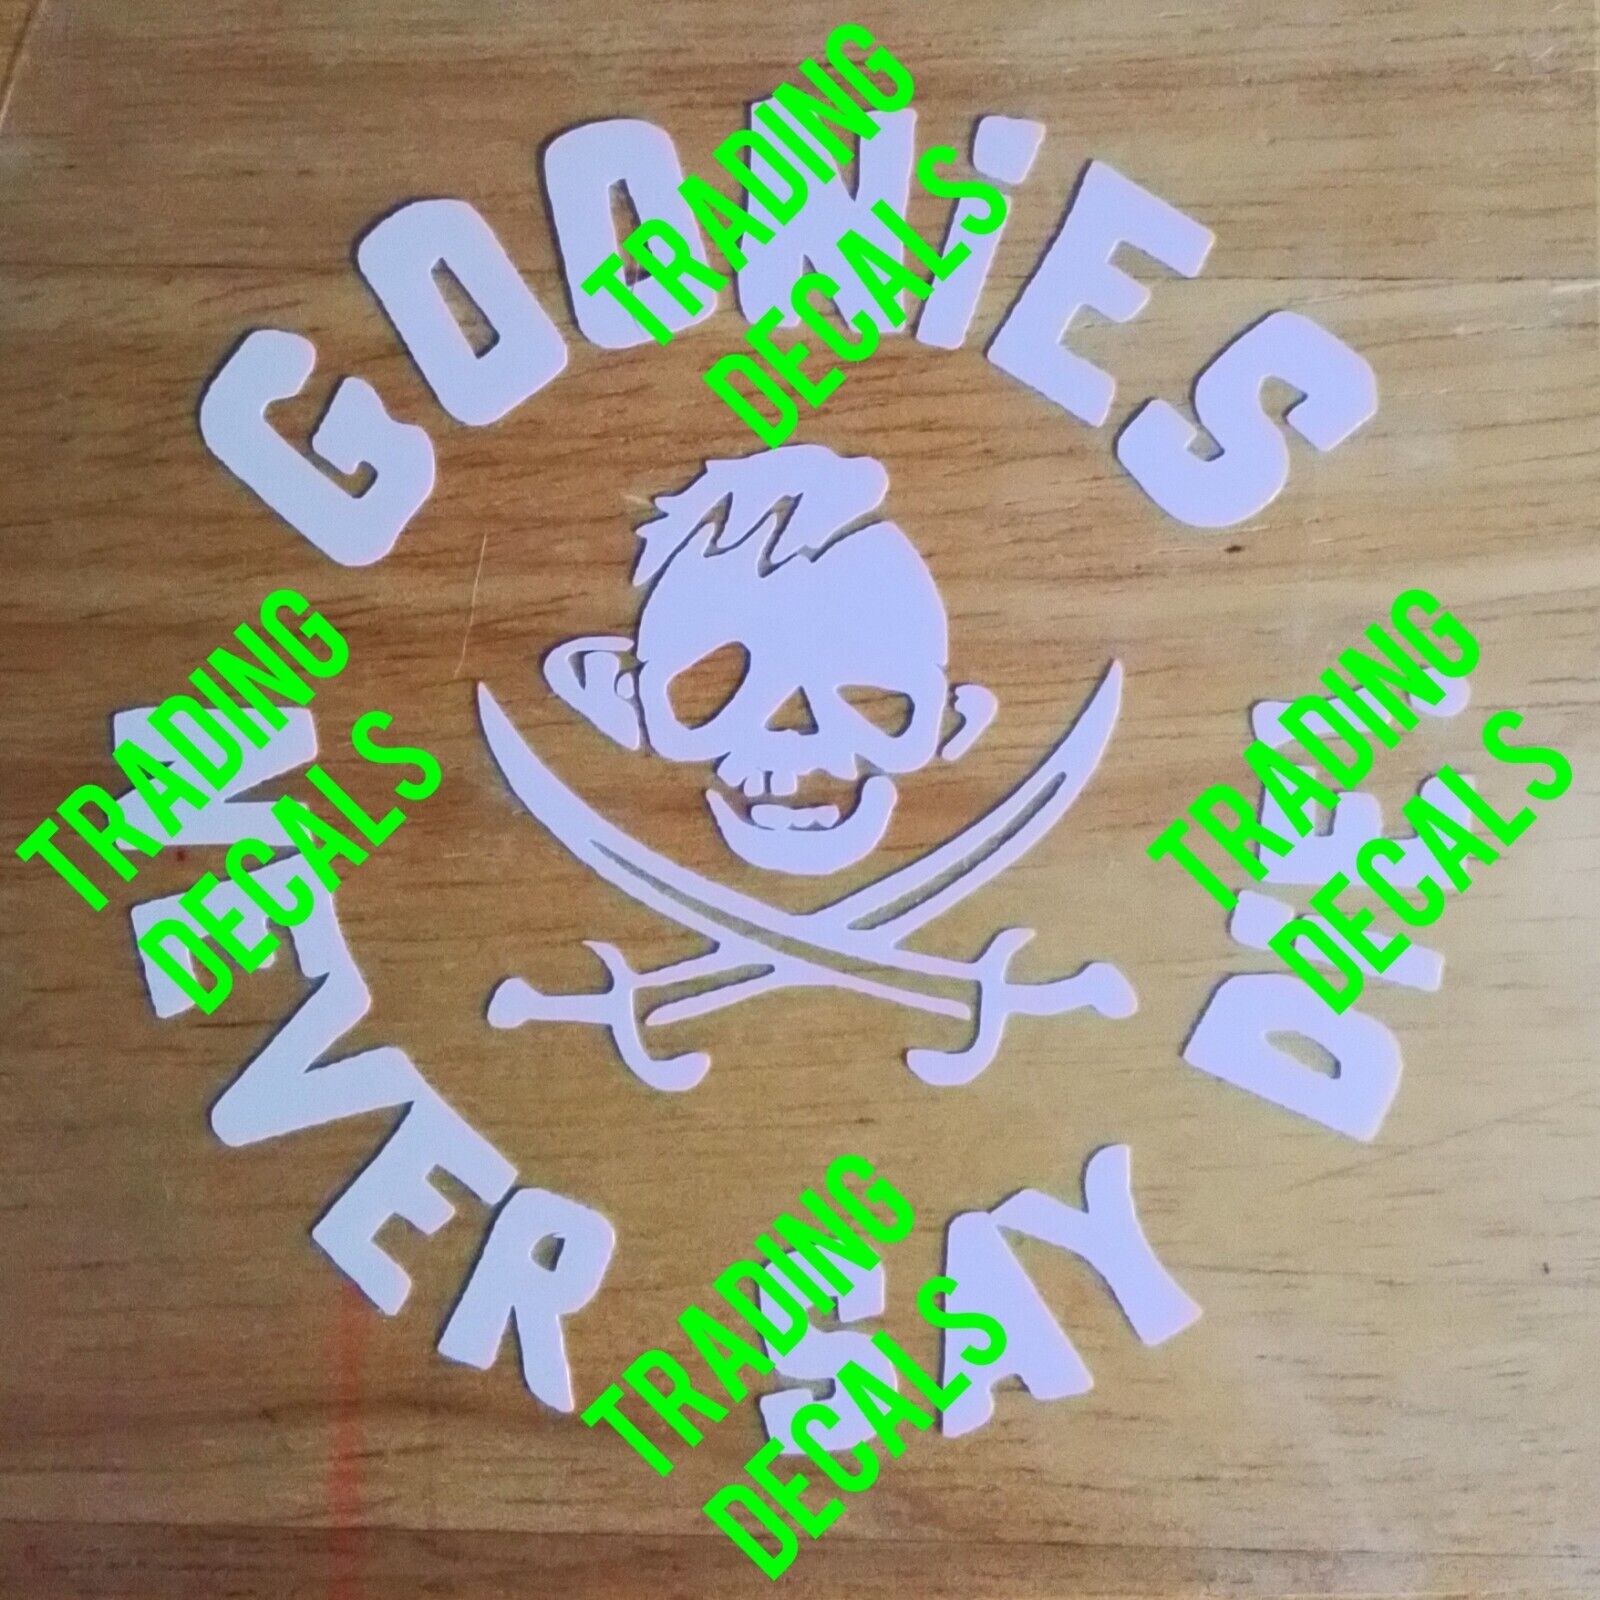 Goonies Never Say Die sticker Decal, Sloth, Chunk, One eyed Willy, The Goonies 